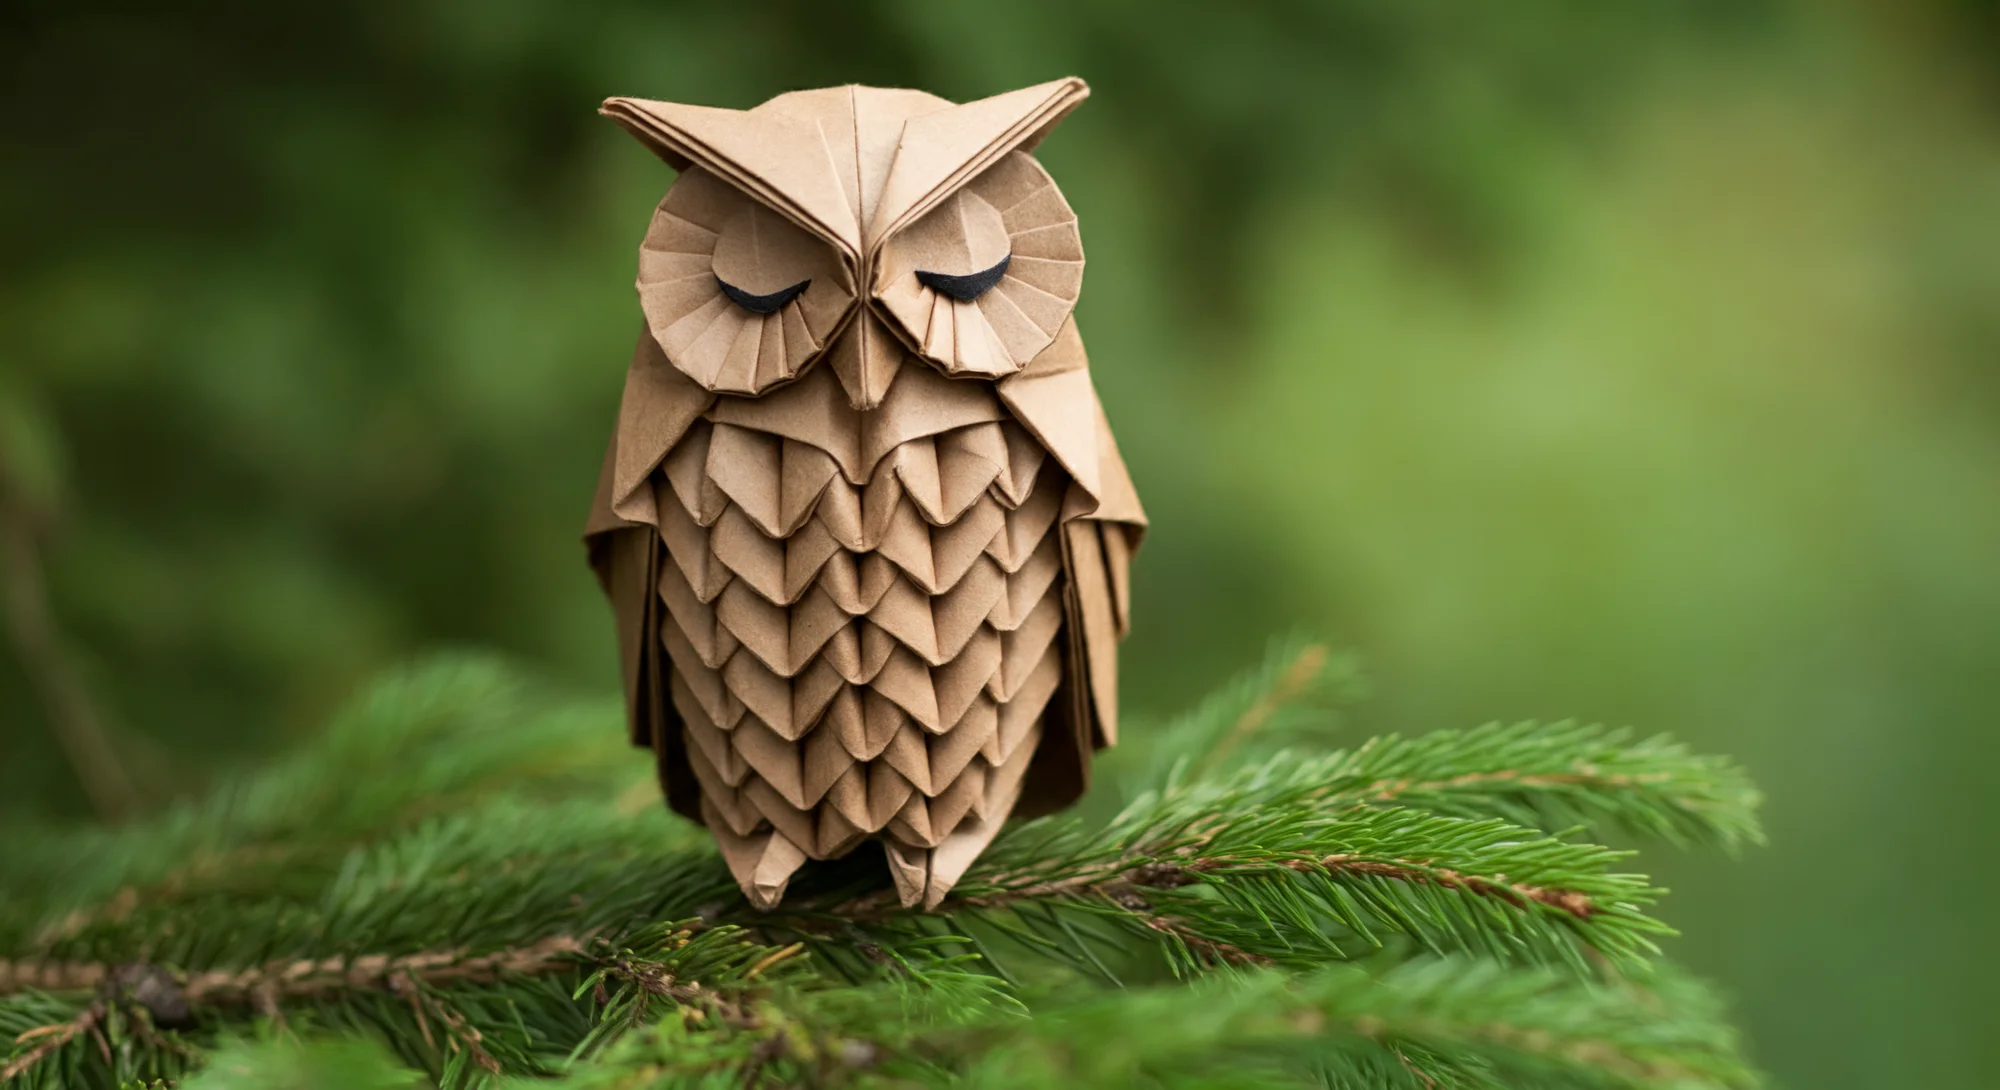 A detailed origami owl, made of brown paper, perches on a pine branch with closed eyes. Its feathers are intricately folded, and it has a serene expression. The background is a blur of green foliage.